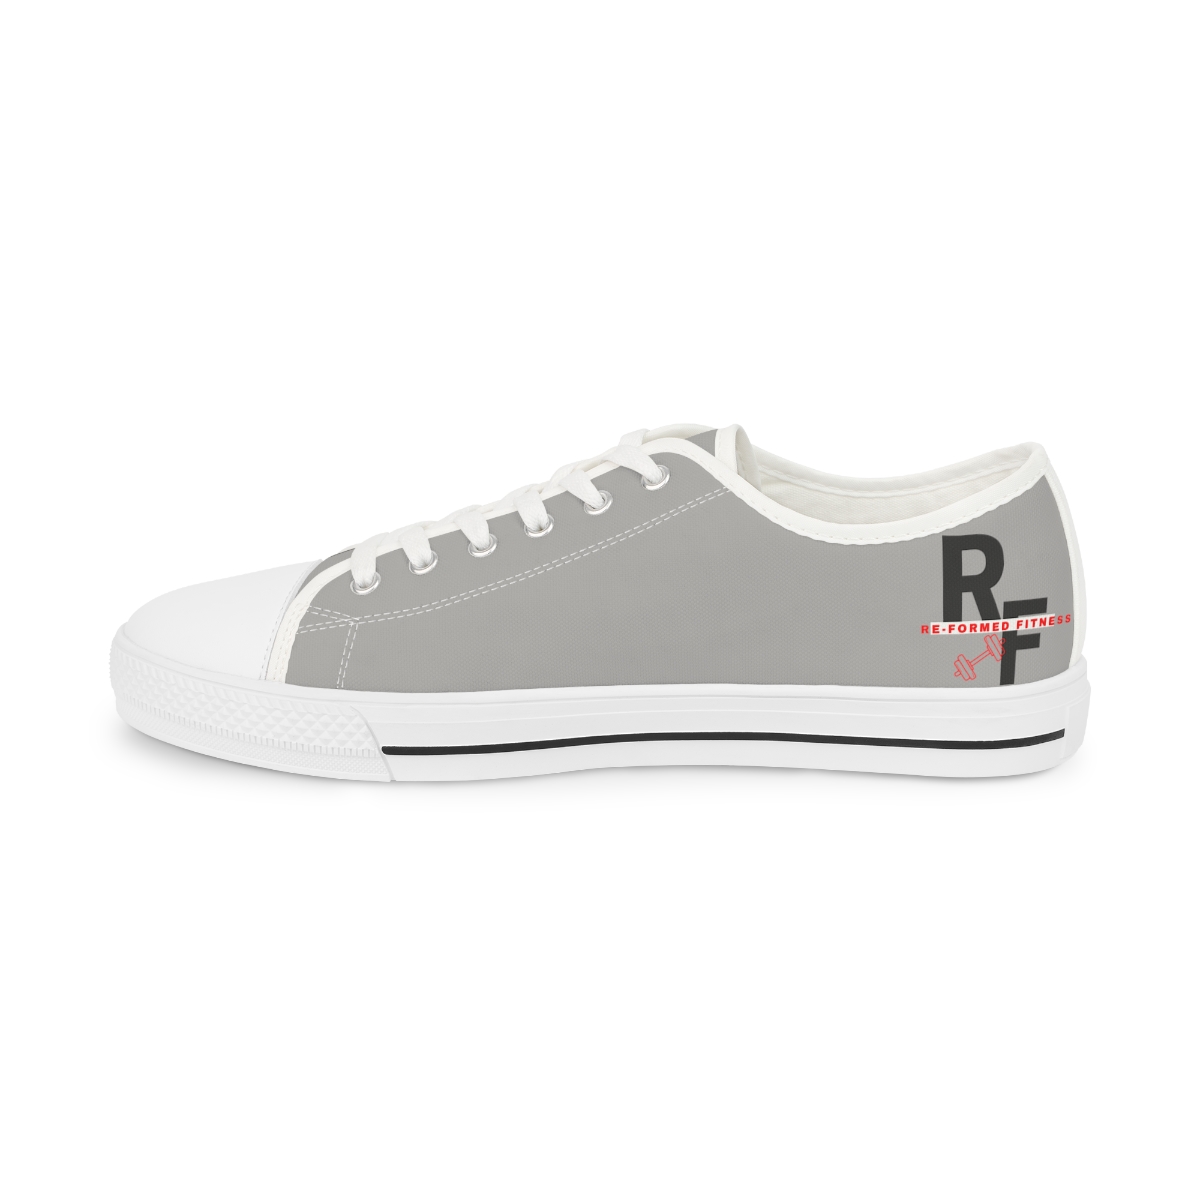 Re-Formed Fitness Sneakers product thumbnail image